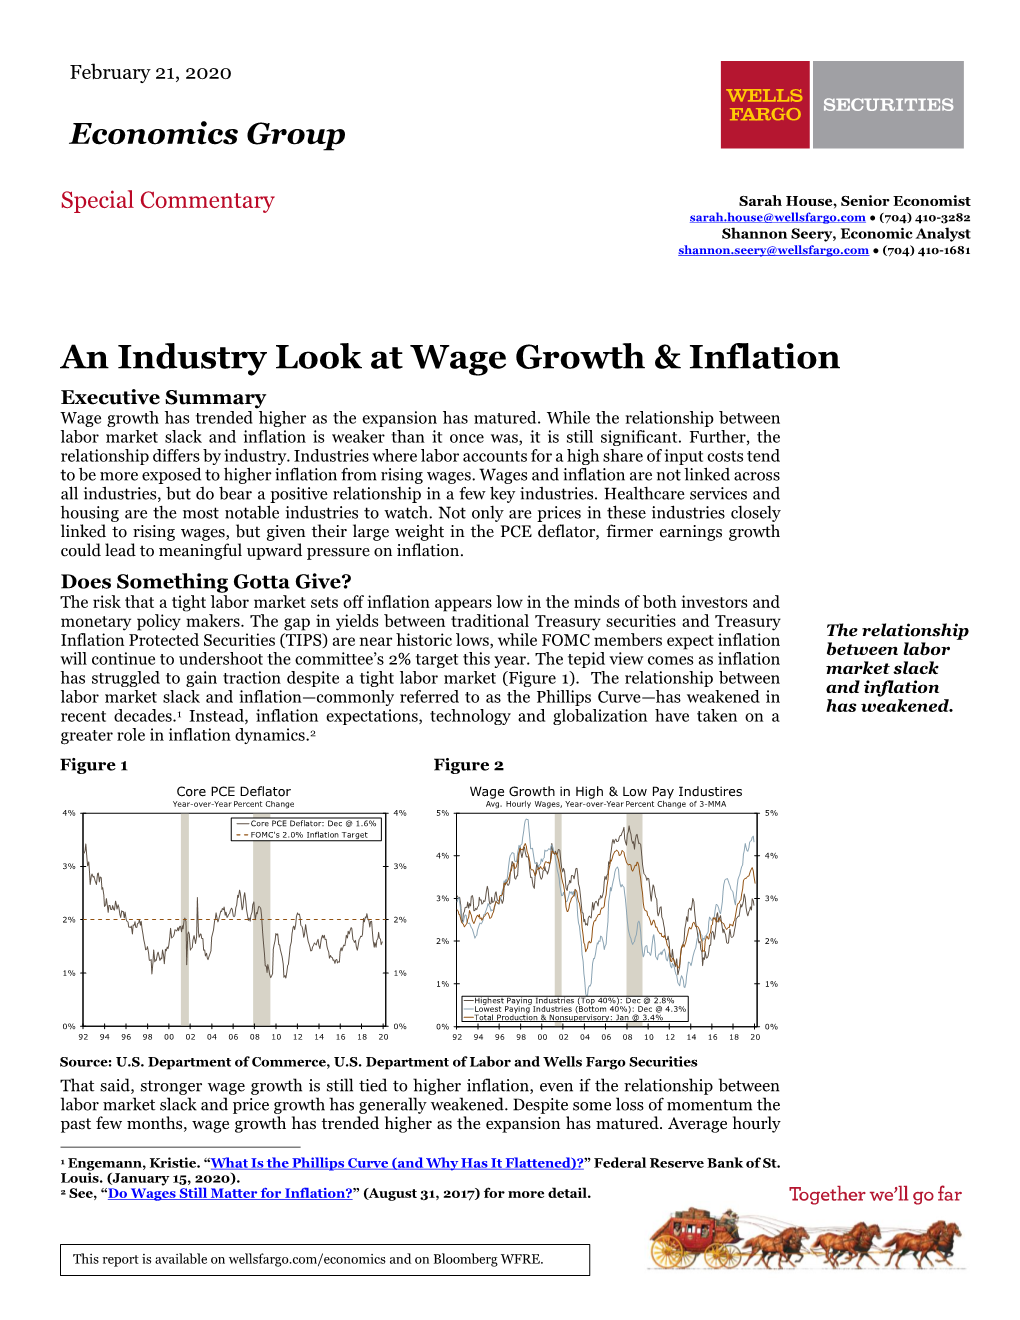 An Industry Look at Wage Growth & Inflation